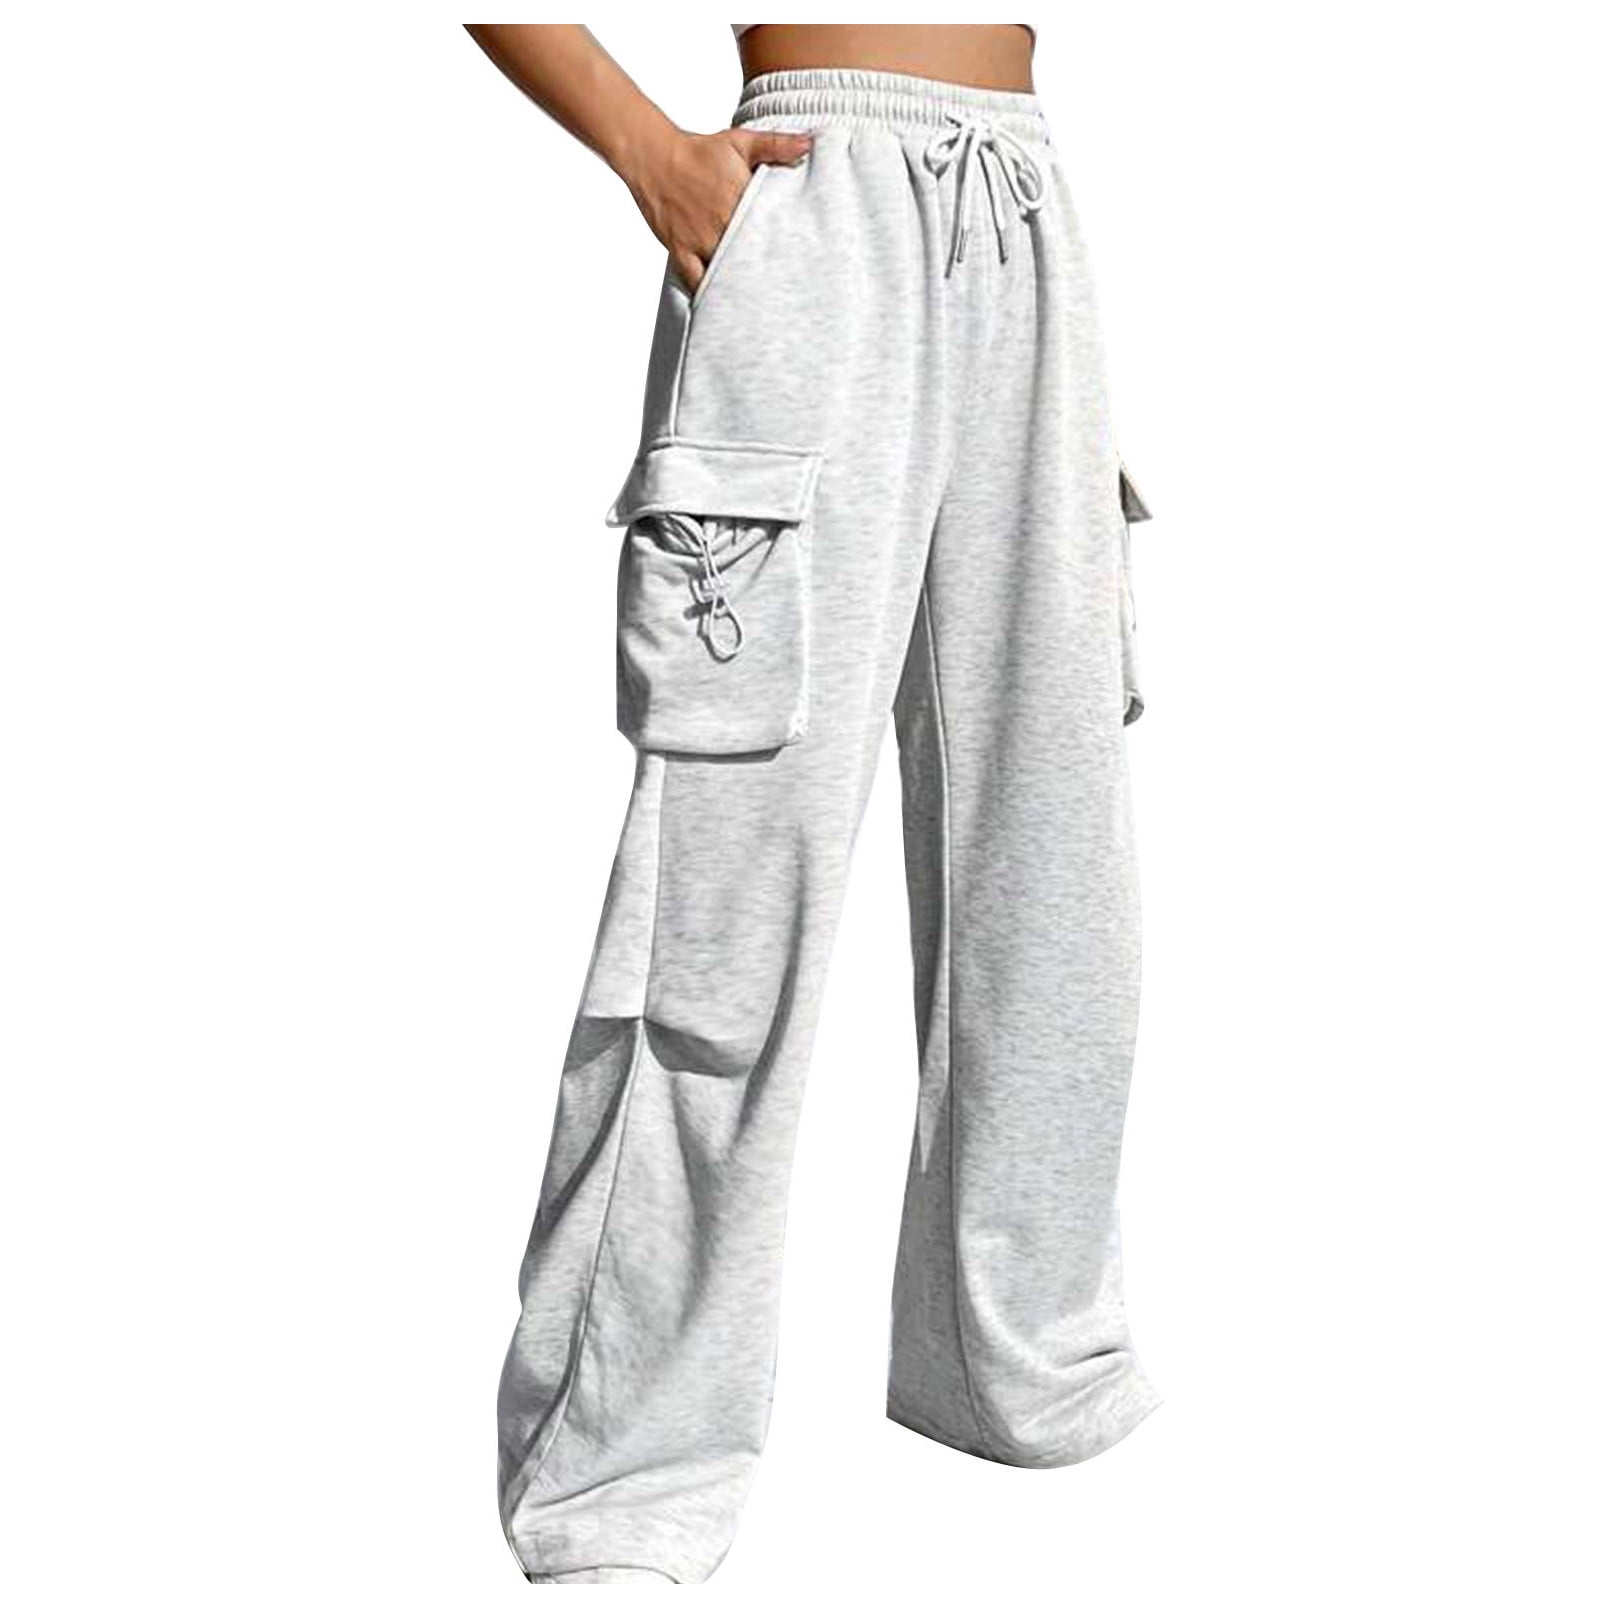 RYRJJ Women Stacked Pants Sherpa Lined Sweatpants Winter Thicked Warm  Jogging Casual Ruched Workout Active Jogger Fleece Pants Gray XL